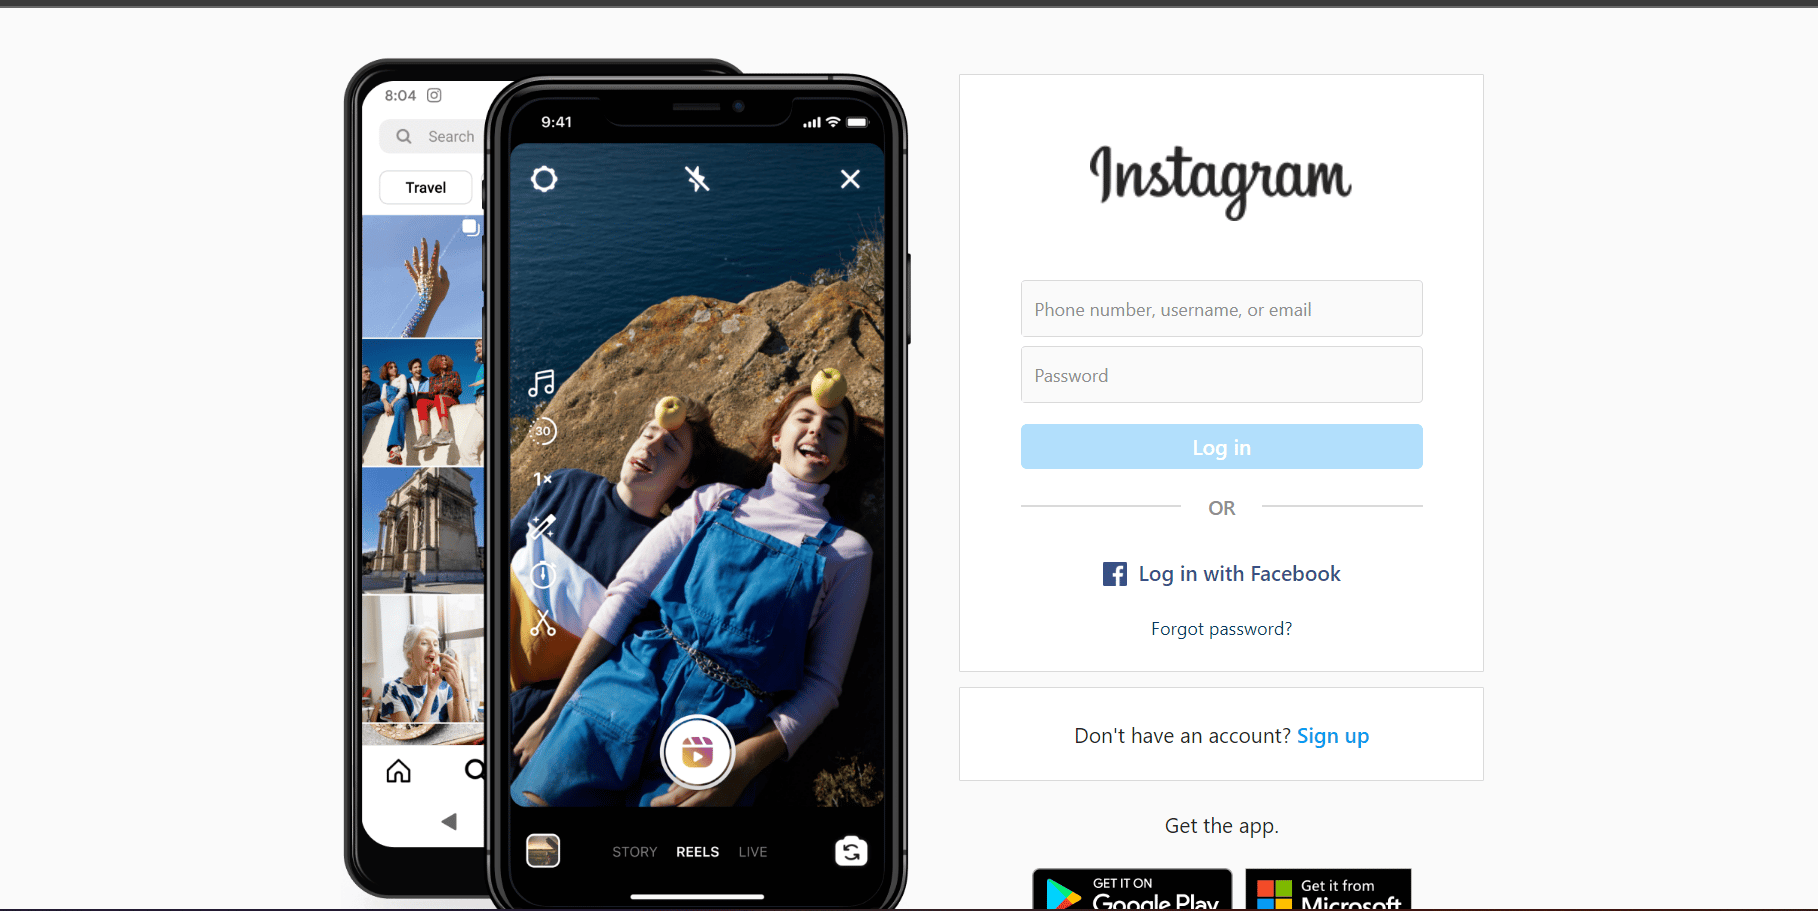 Open the Instagram app on your mobile or laptop device.